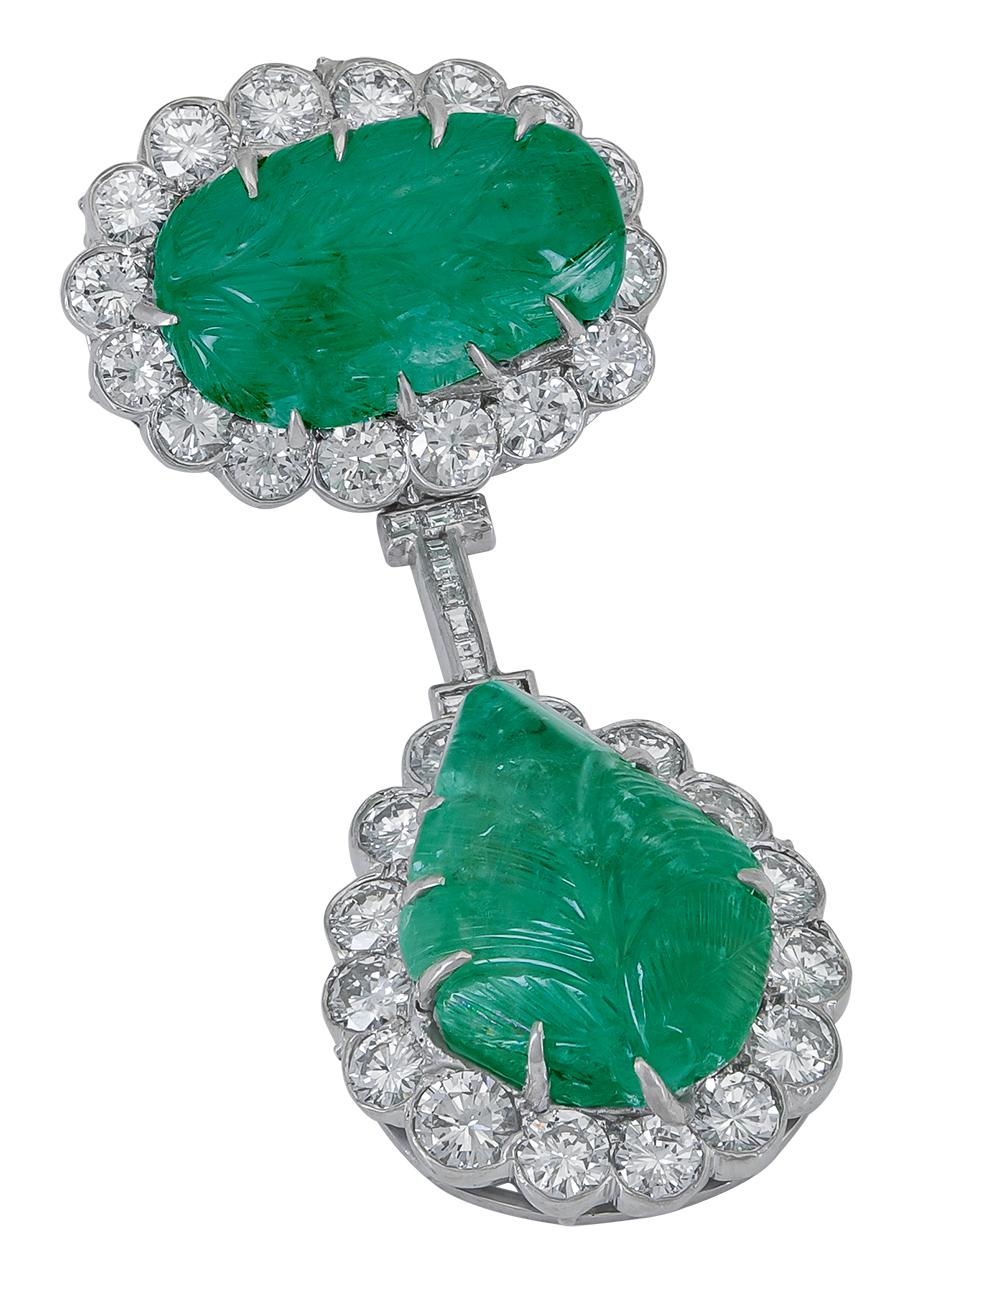 A unique diamond brooch that features two carved green emeralds each surrounded by a row of round brilliant diamonds. The emerald and diamond halo is attached by a thin yet durable wire accented with diamonds. 
Emeralds weigh 68 carats